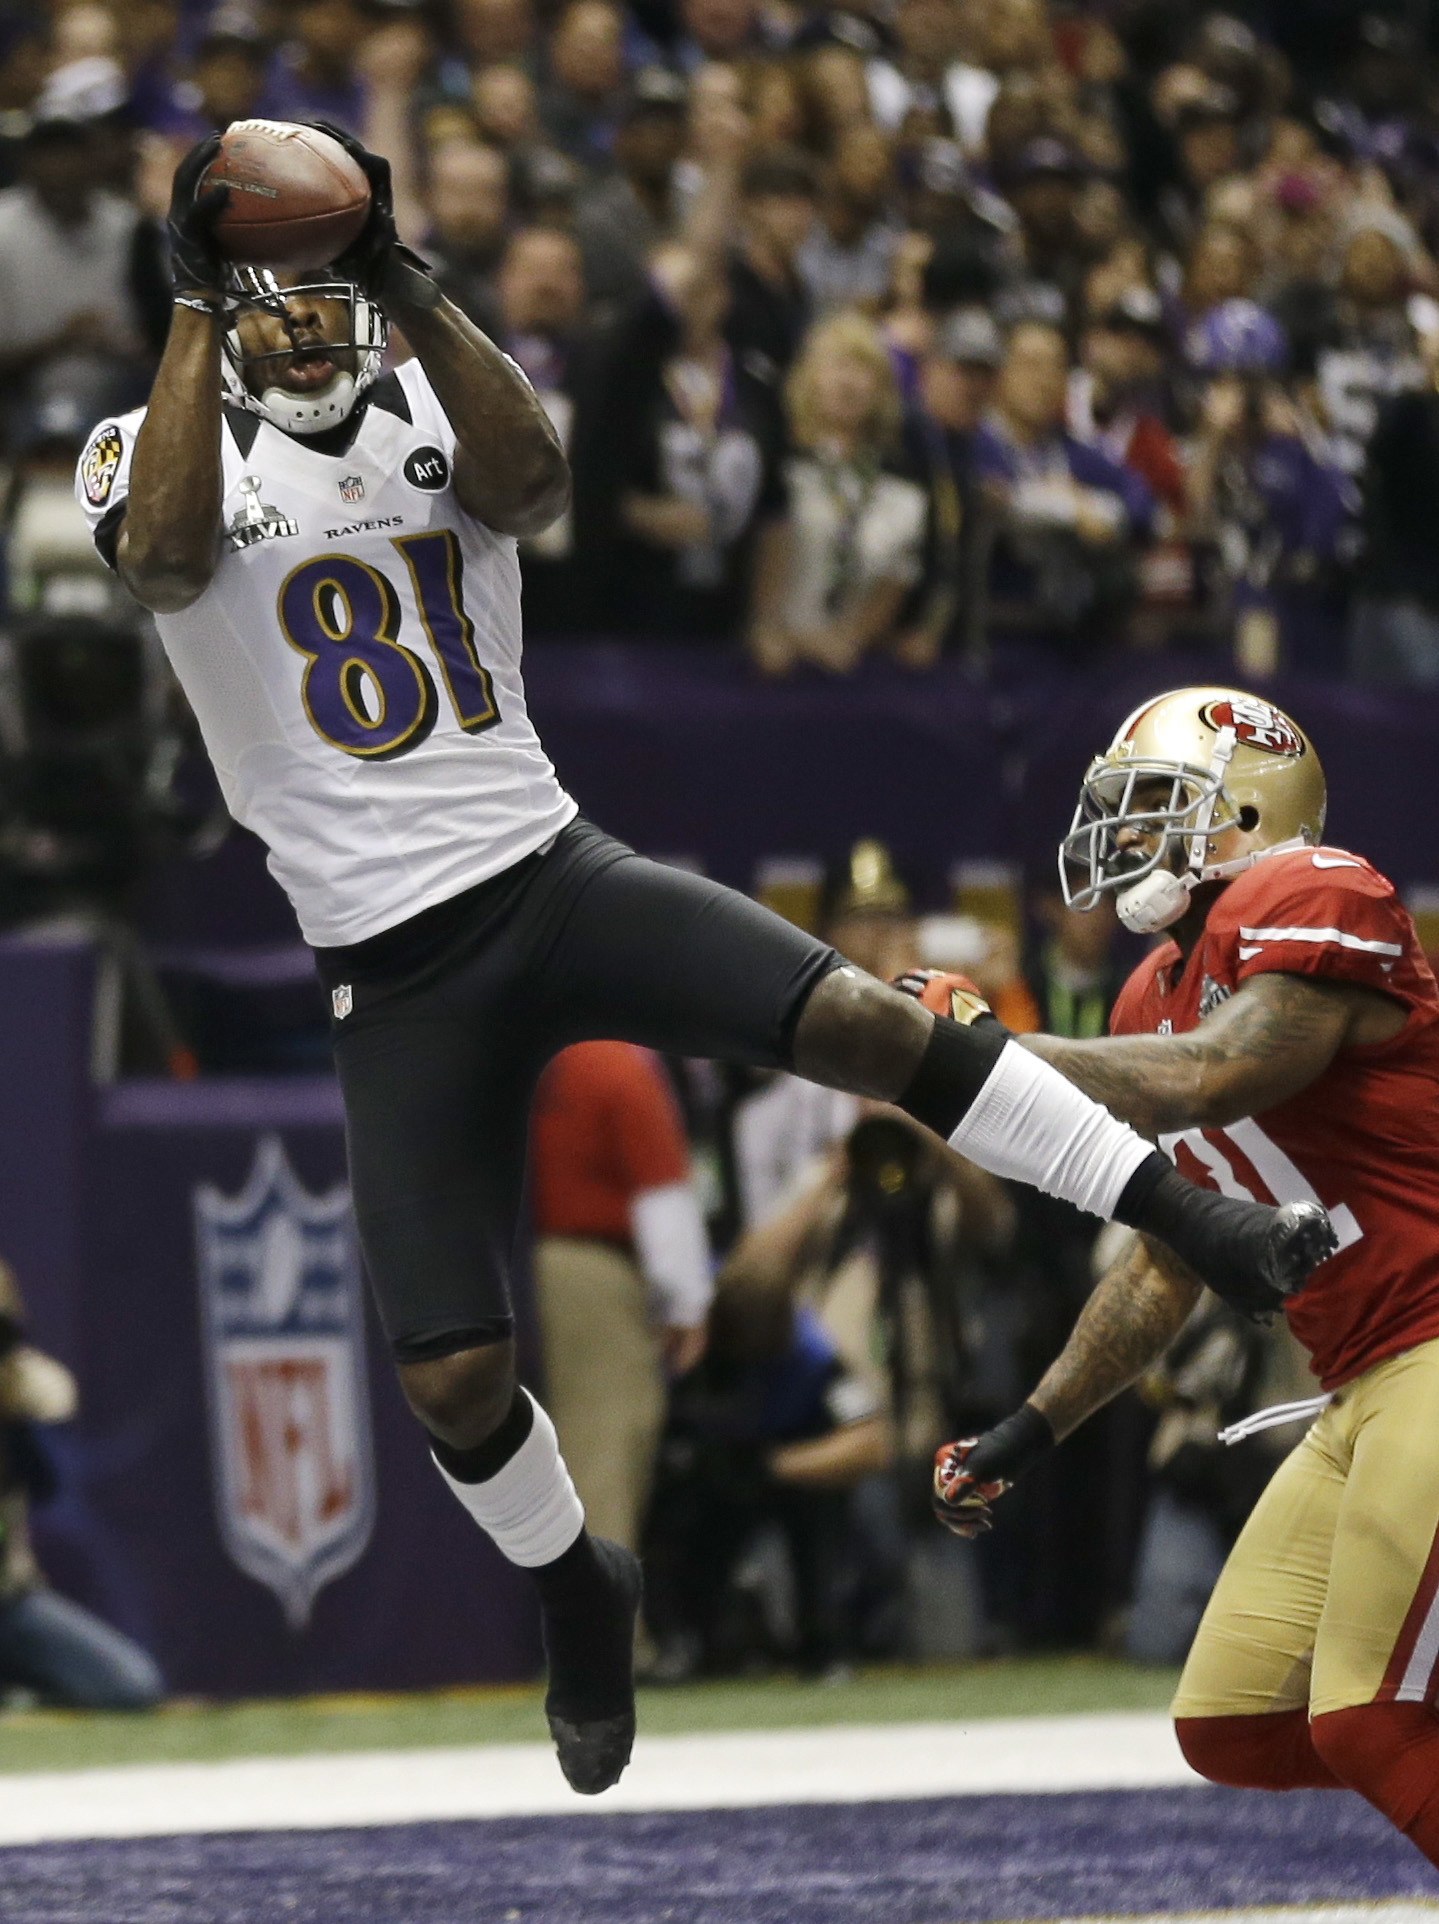 Baltimore Ravens wide receiver Anquan Boldin (81) catches a 13-yard touchdown pass against San Francisco 49ers safety Donte Whitner during the first half Sunday.Boldin caught six passes for 104 yards and scored the game's first touchdown.